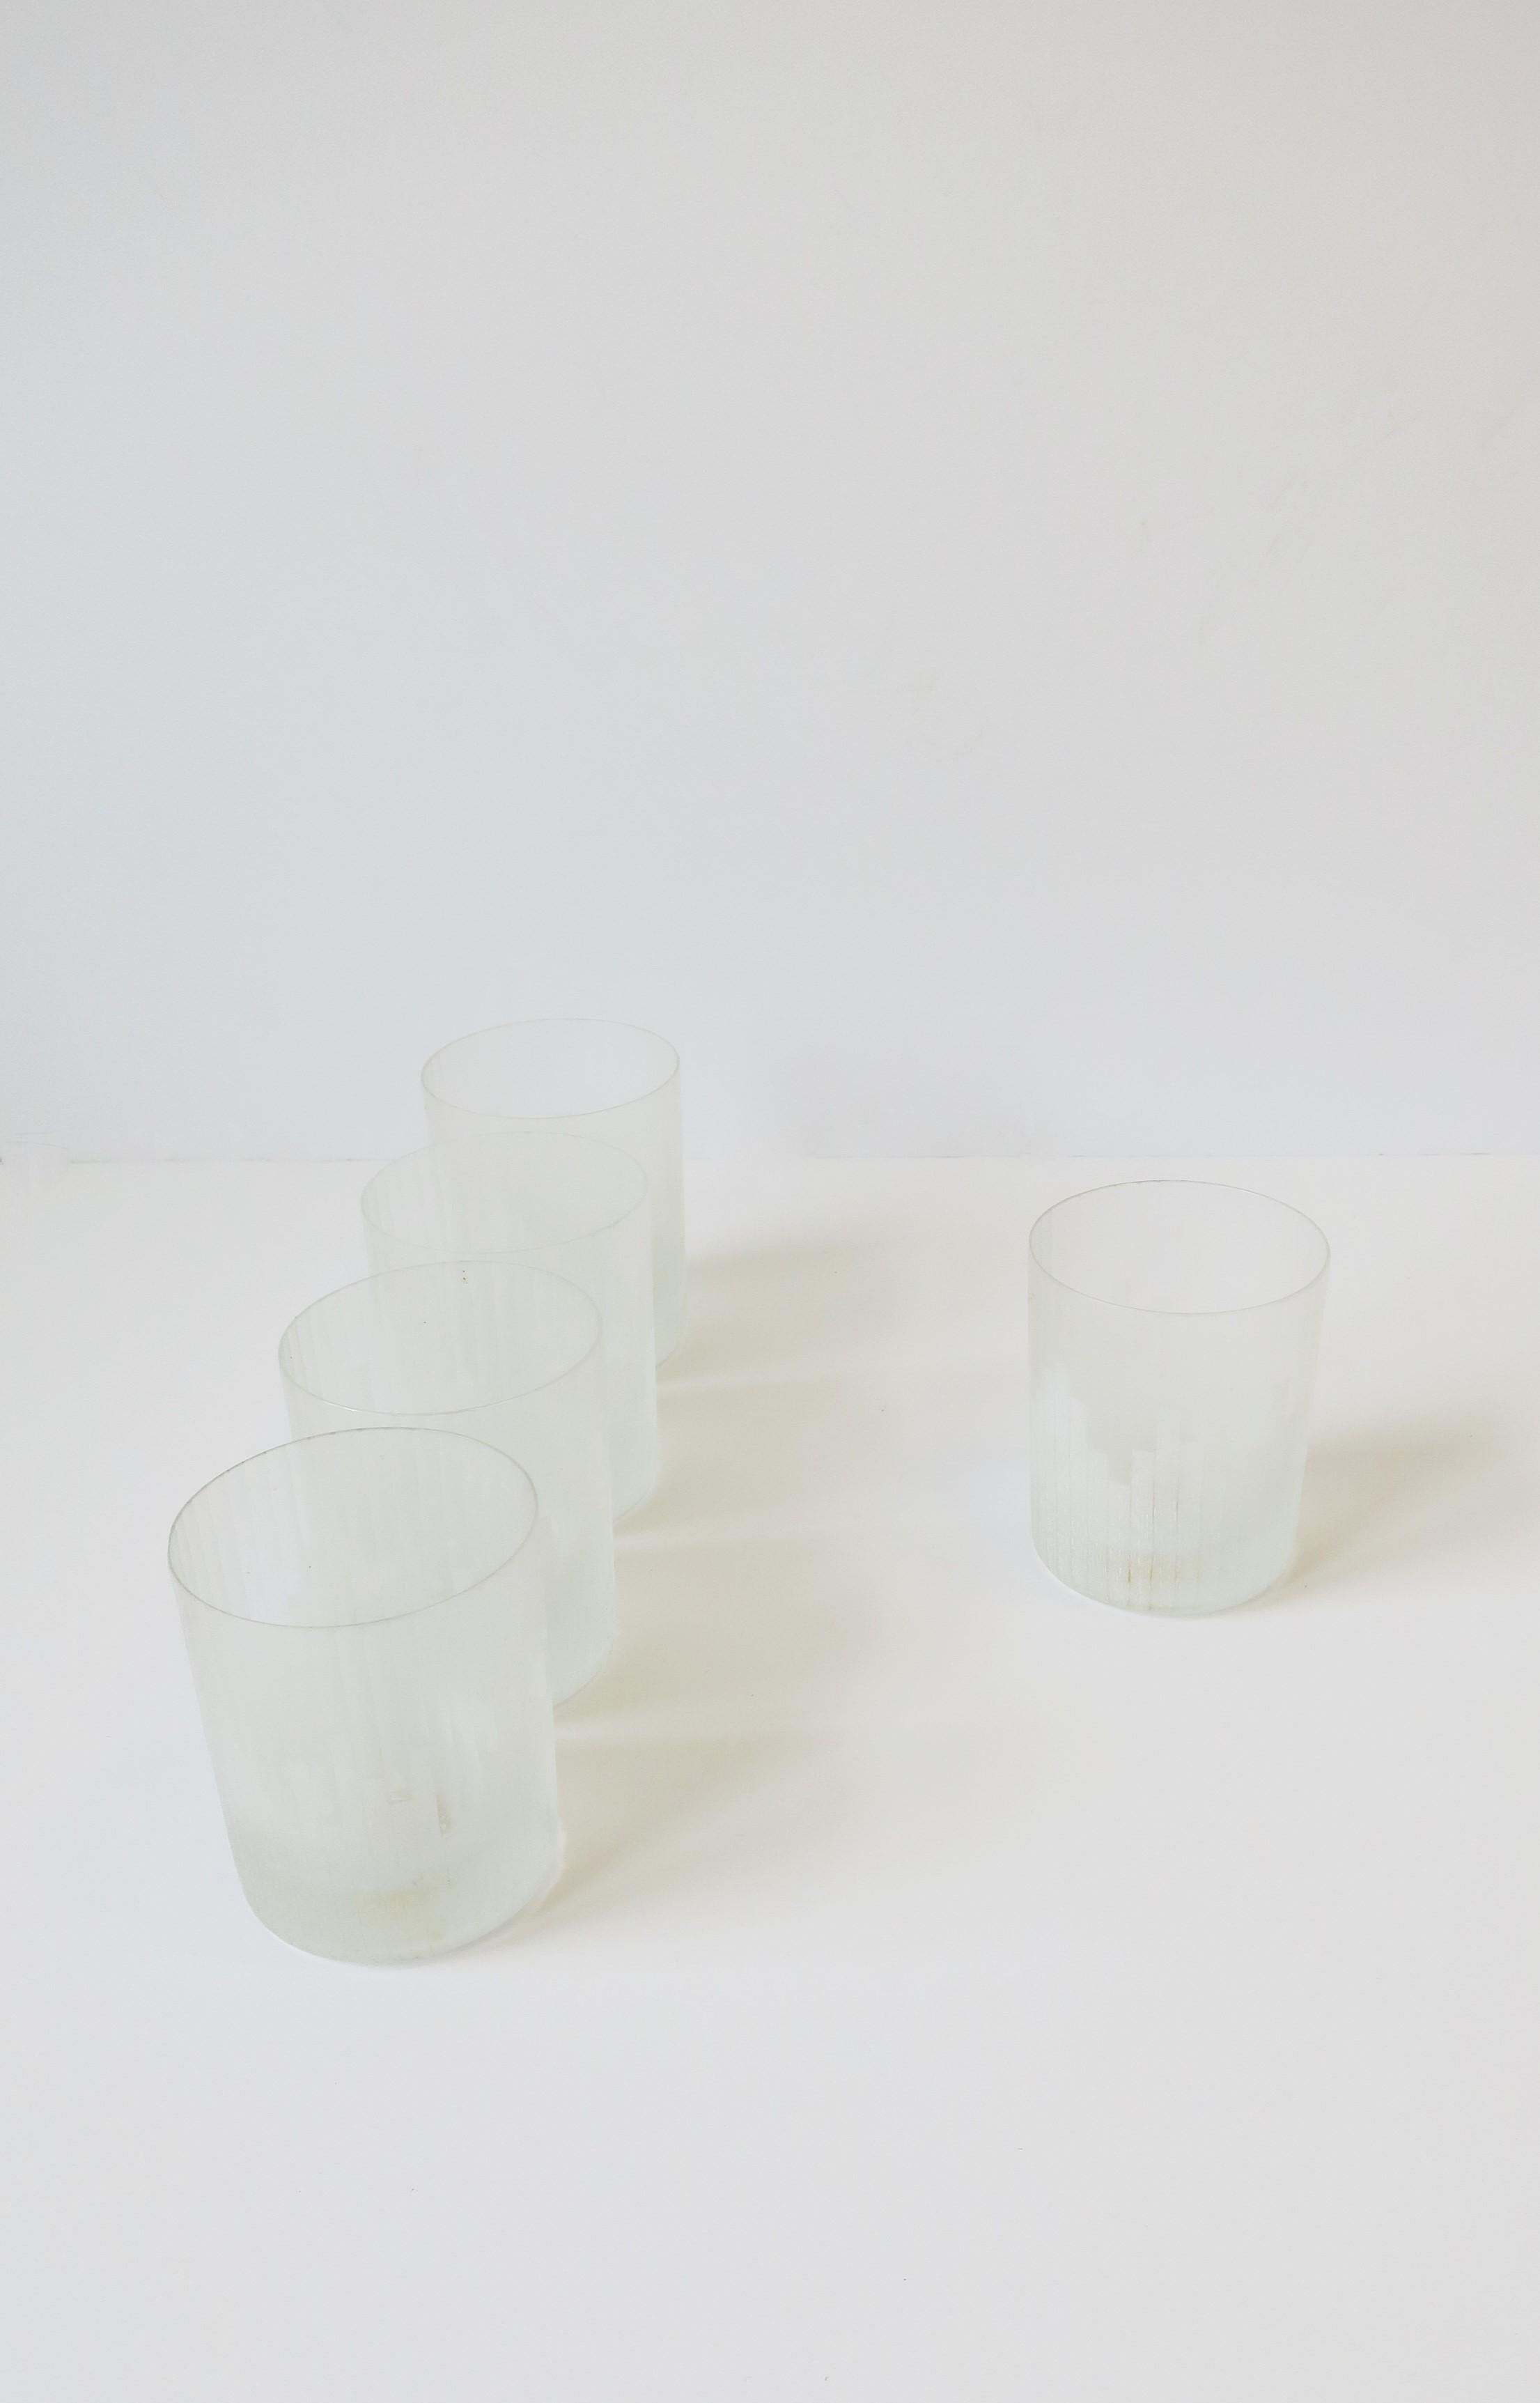 70s Modern German Carl Rotter Lubeck Rocks' Cocktail Glasses, Set of 5 In Good Condition For Sale In New York, NY